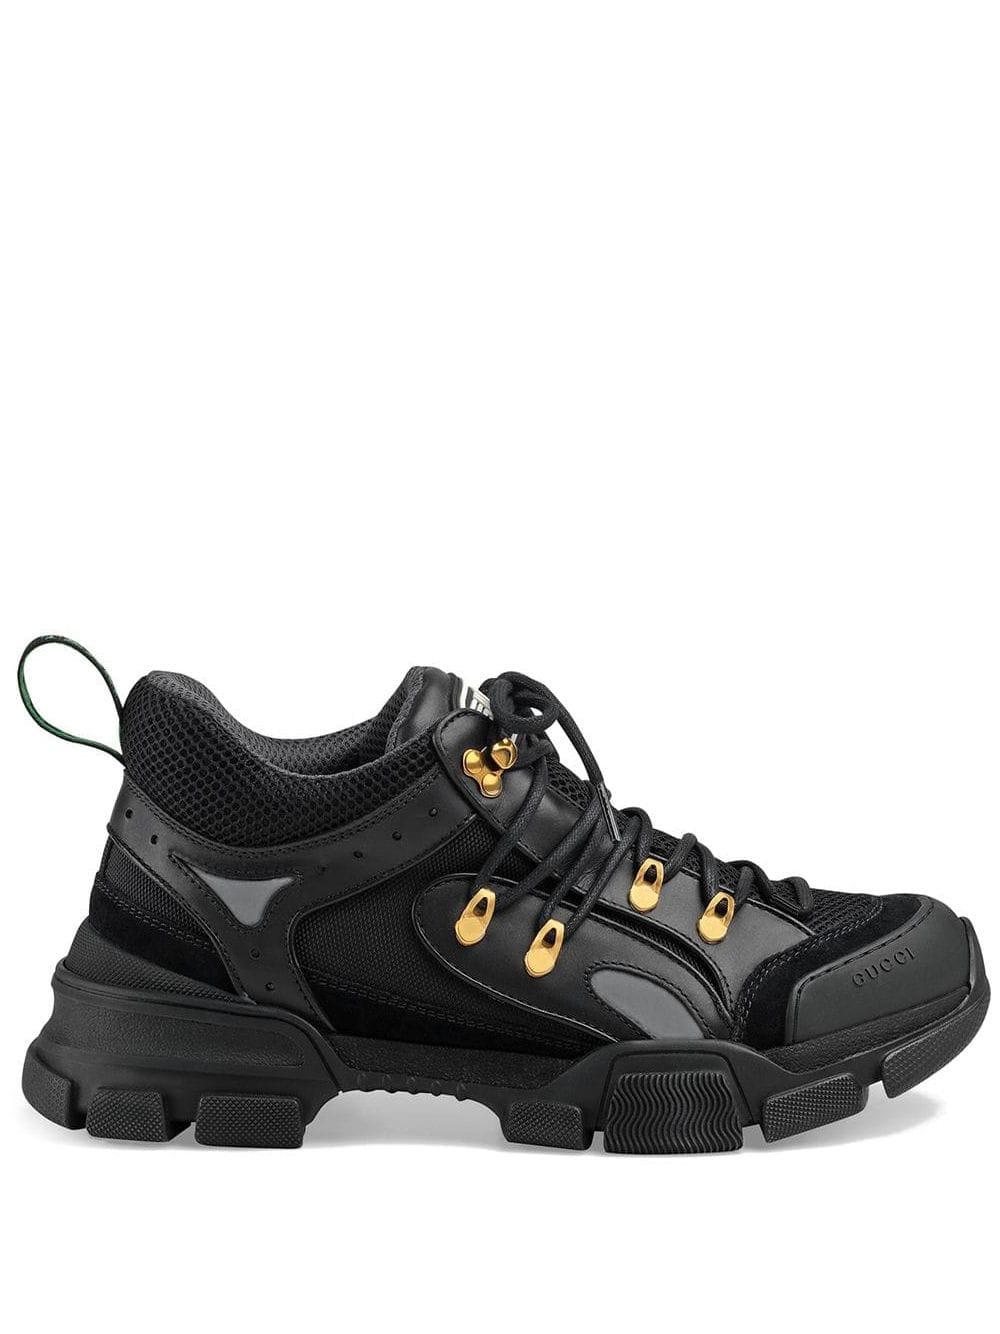 Gucci Rubber Flashtrek Sneakers in Black Leather (Black) for Men - Lyst